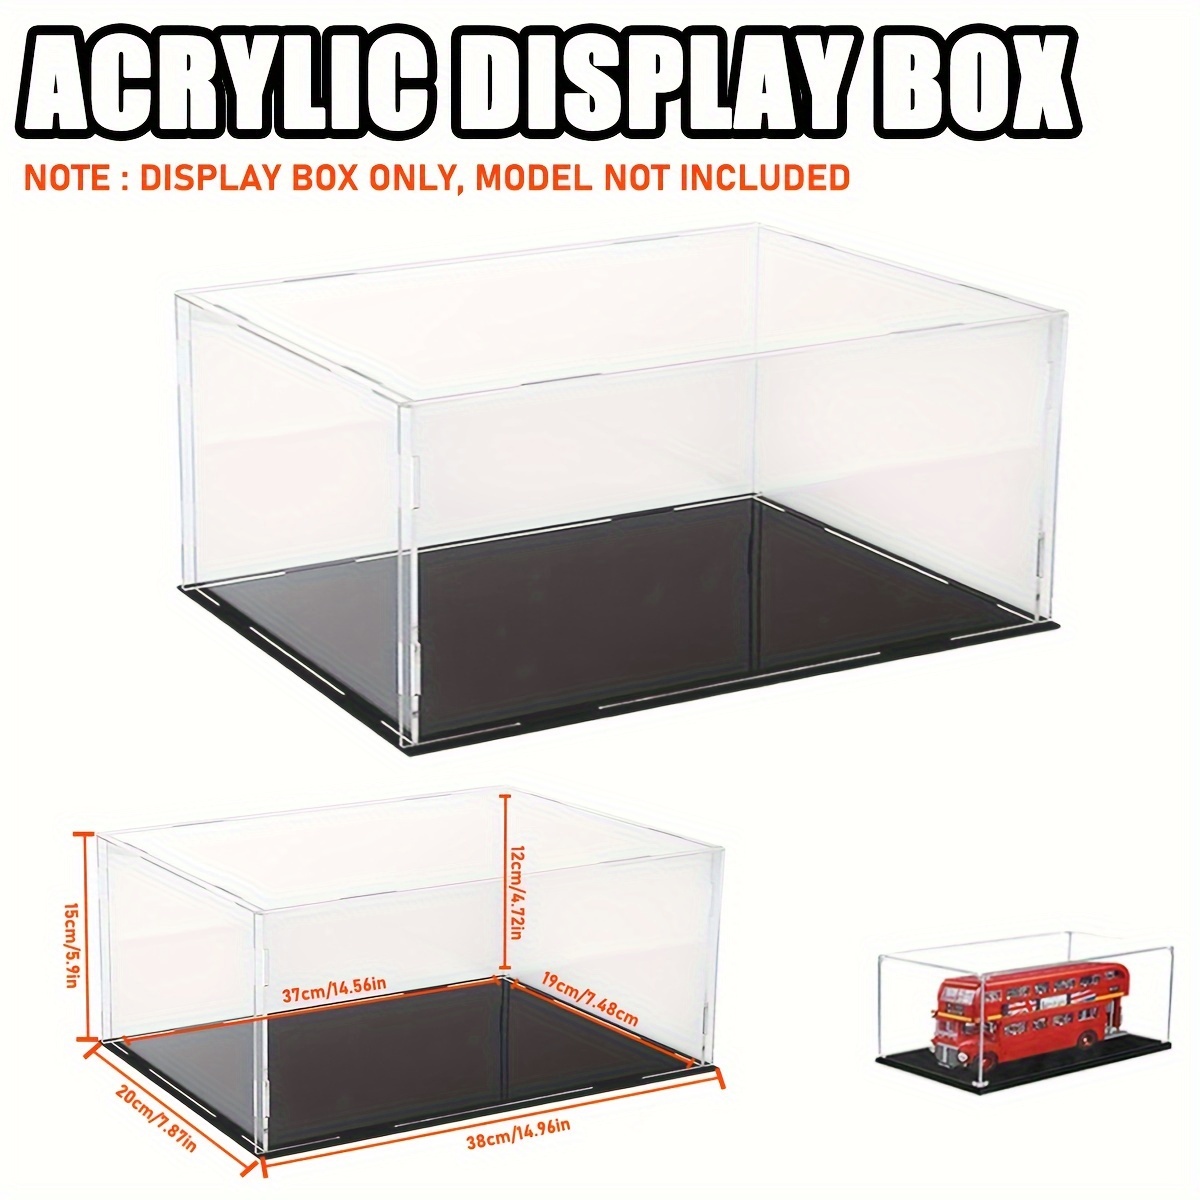 

1:14 Scale Acrylic Display Case For Collectibles - Transparent, Detachable Storage Box For Model Cars & Bricks, Easy Assembly, 37x19x12cm